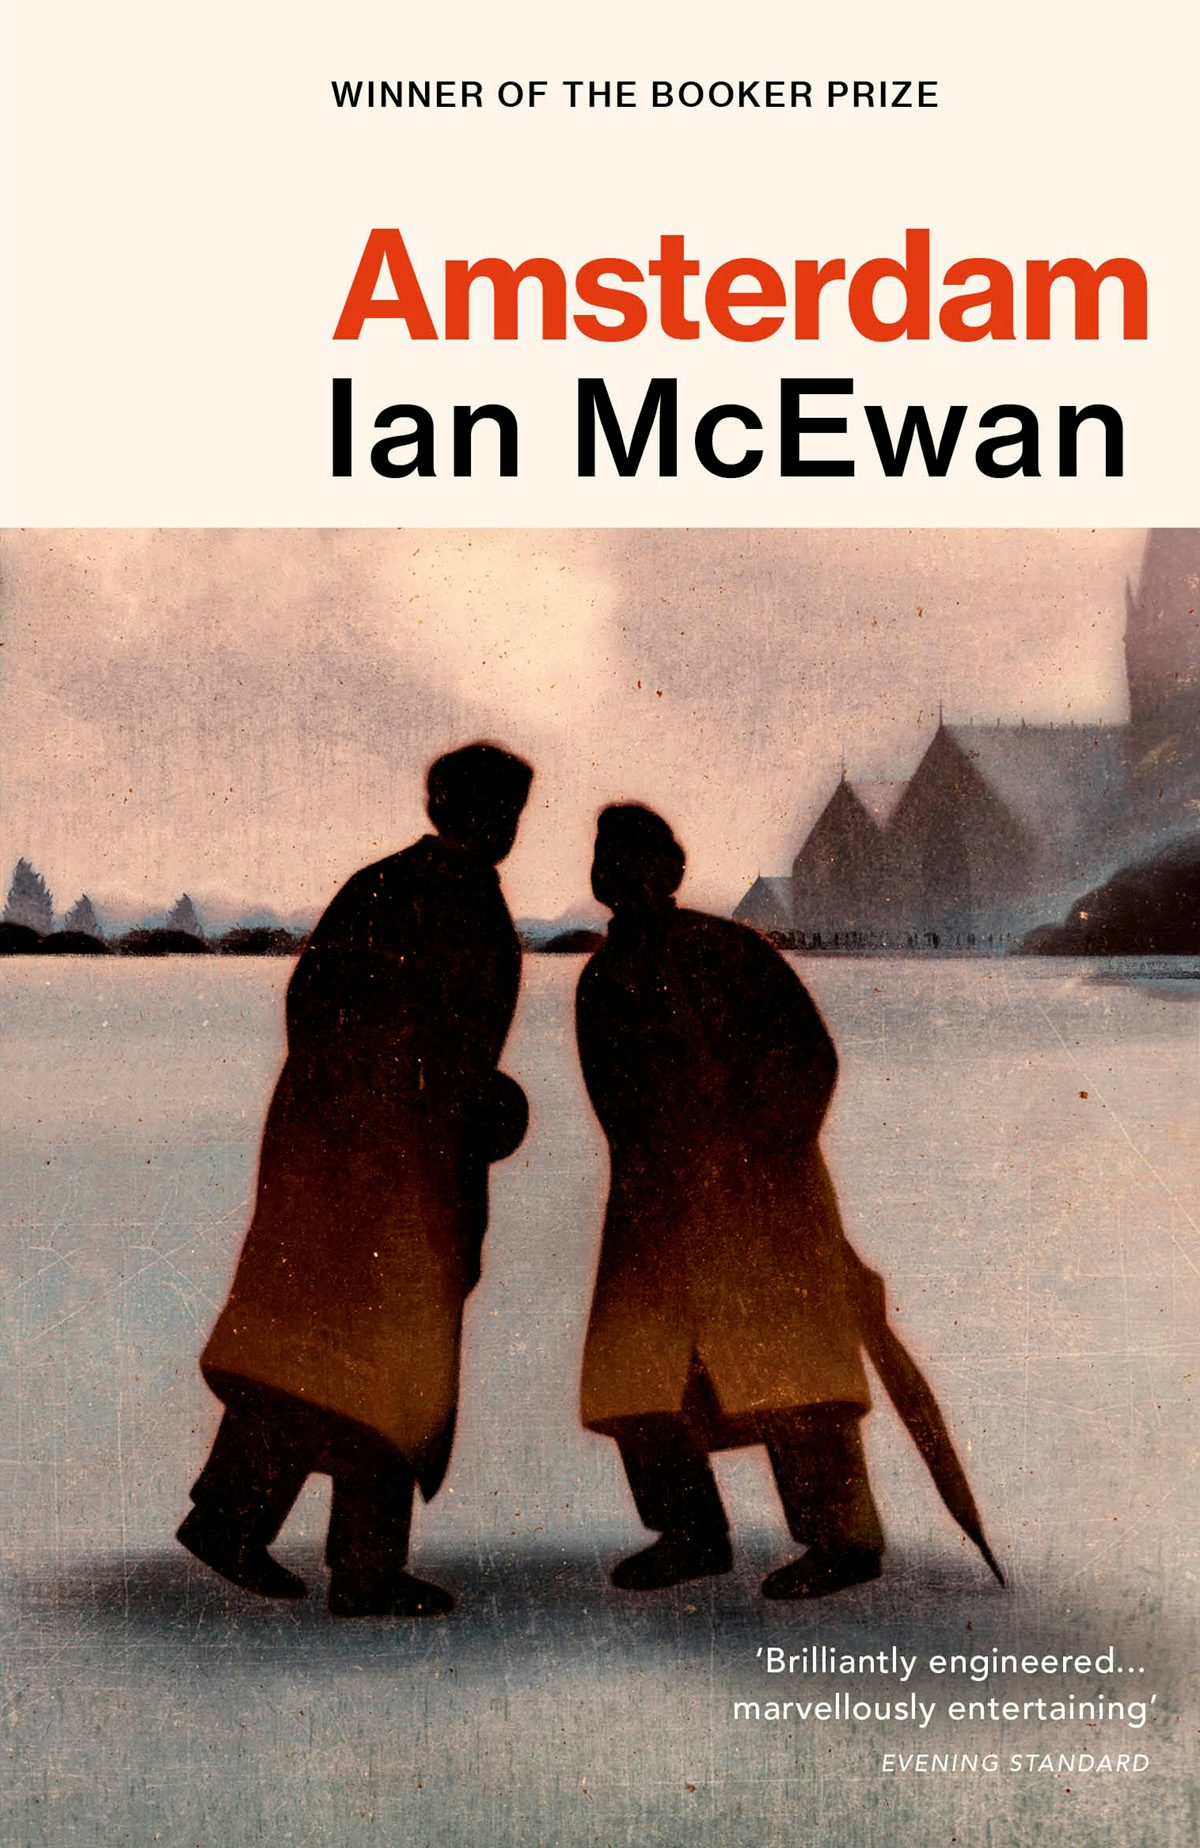 Cover of Amsterdam by Ian McEwan showing an illustration of two figures wearing long coats and trousers, one carrying an umbrella, against a hazy abstract outlines of buildings in the background